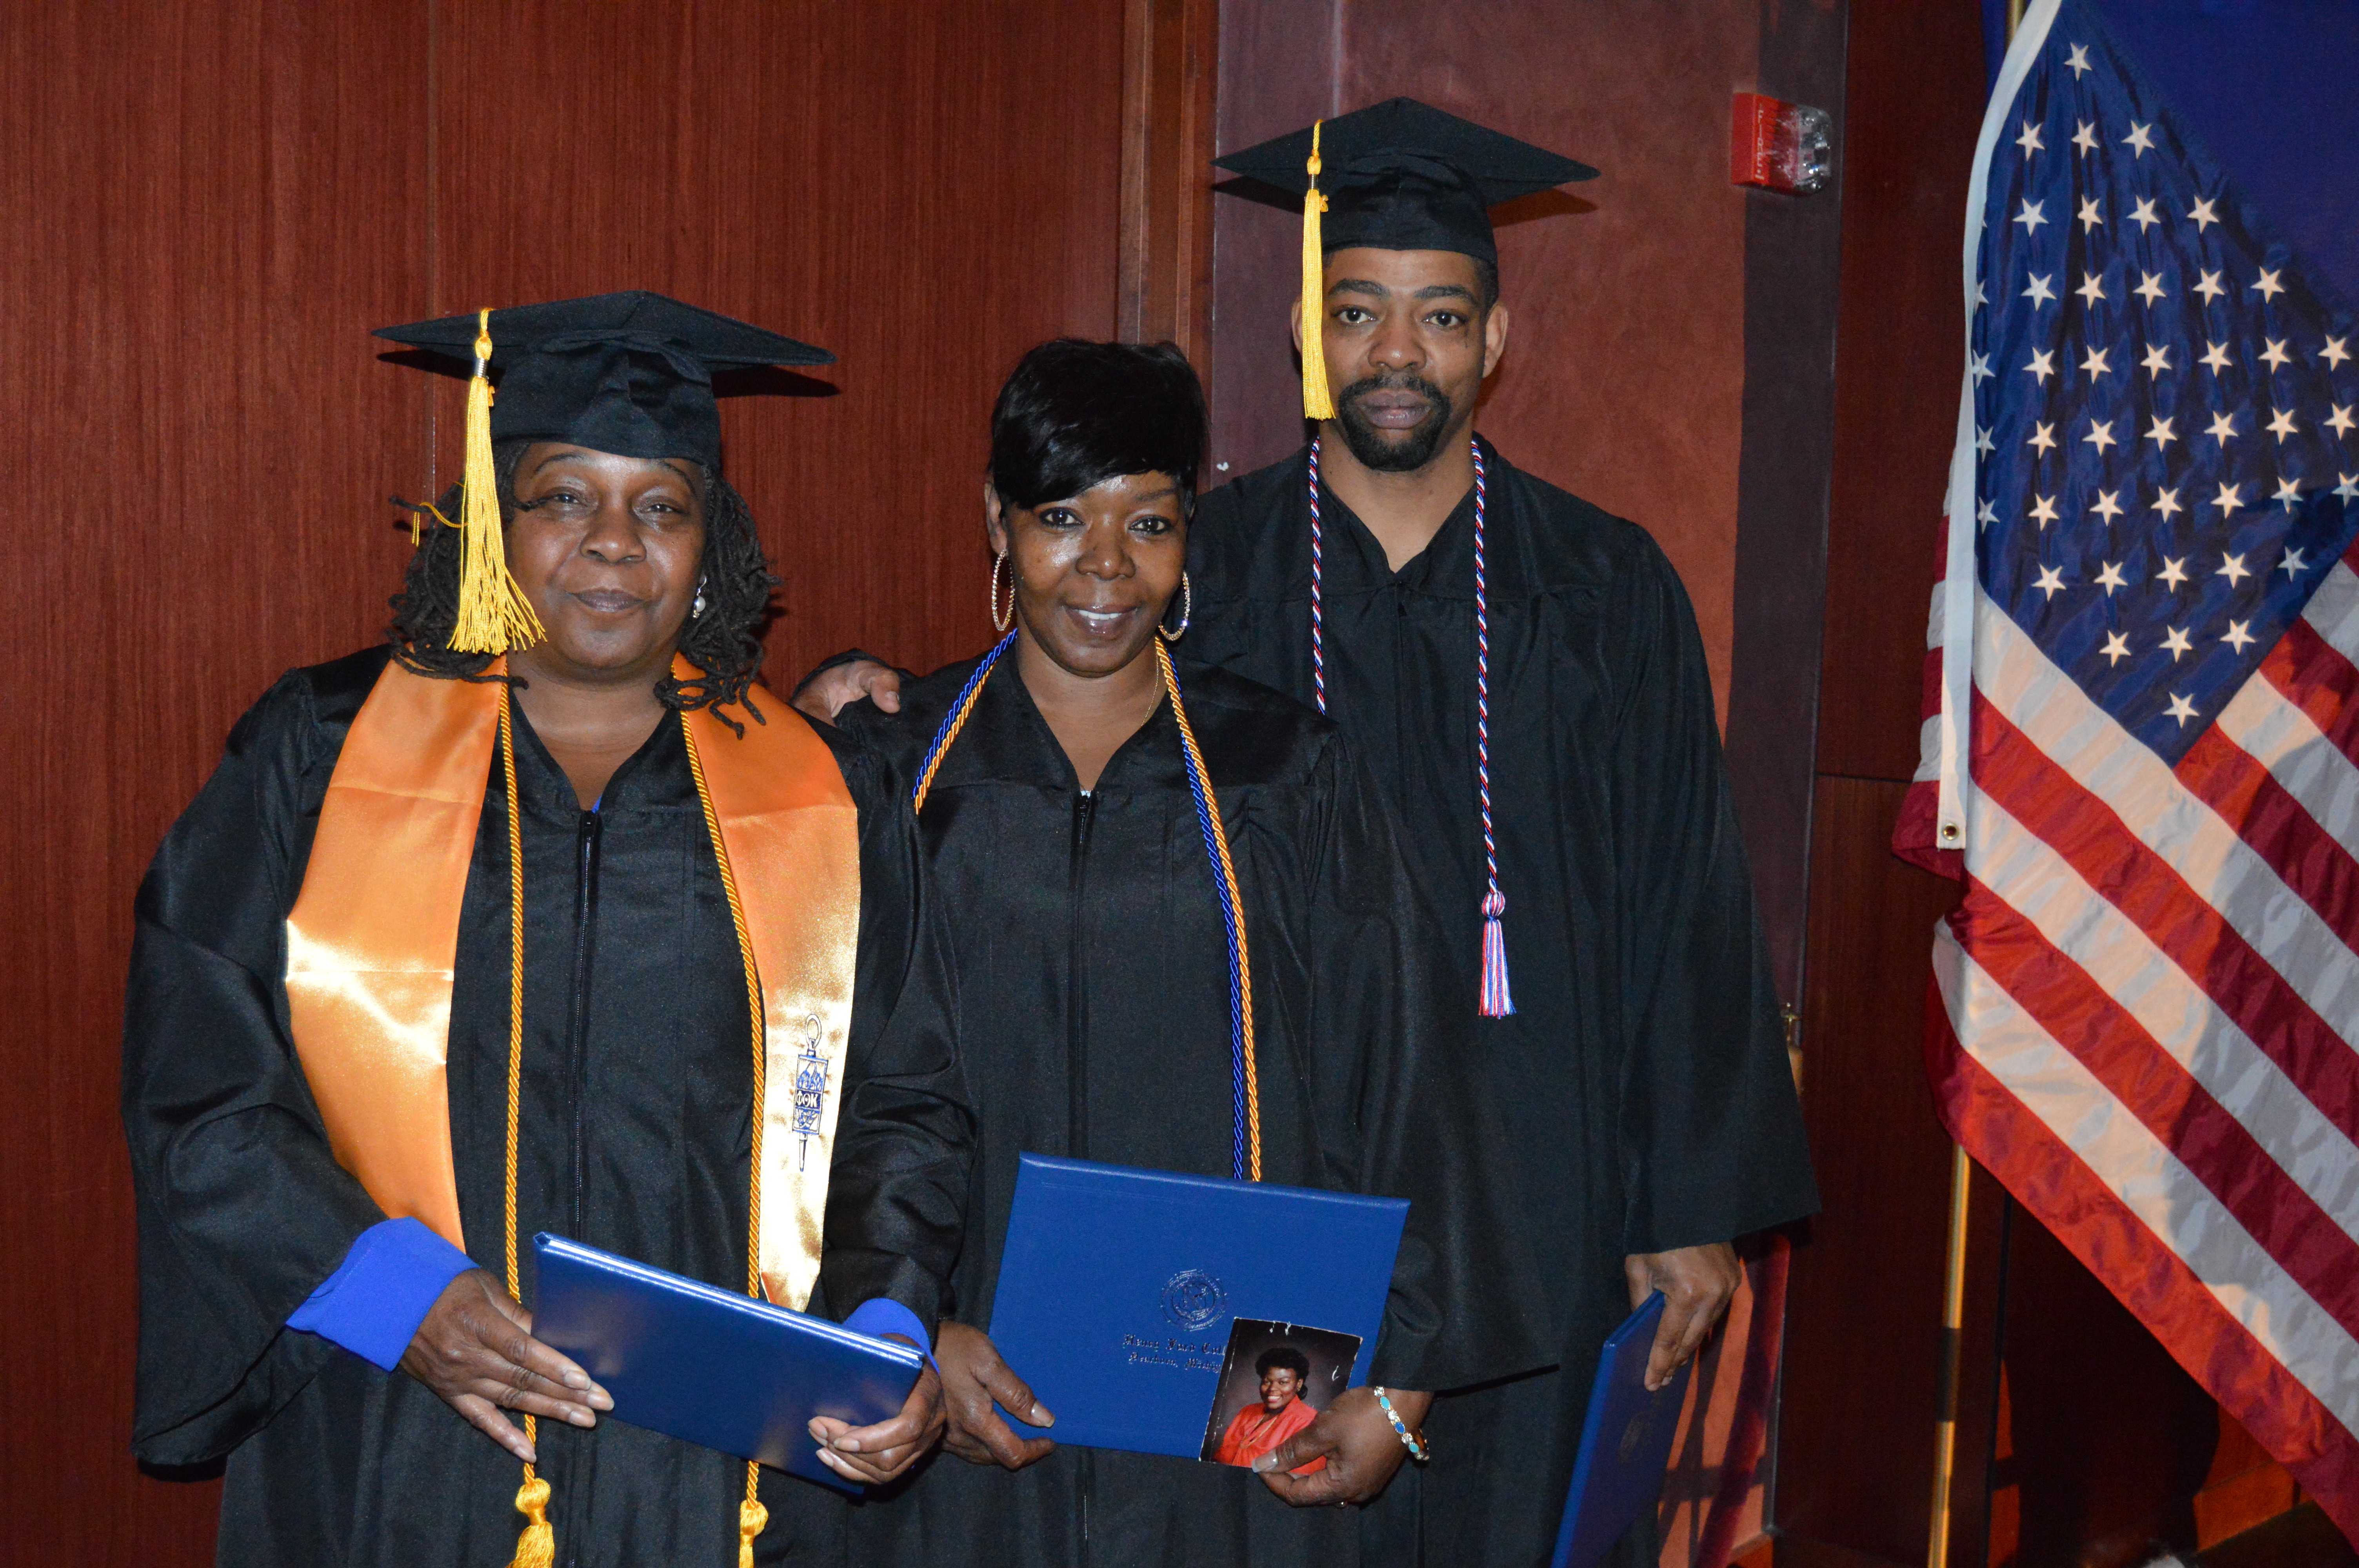 From left to right: Brenda McCall, Beverly Etchen and Carl Matsey II stand in graduation gowns and caps holding diplomas